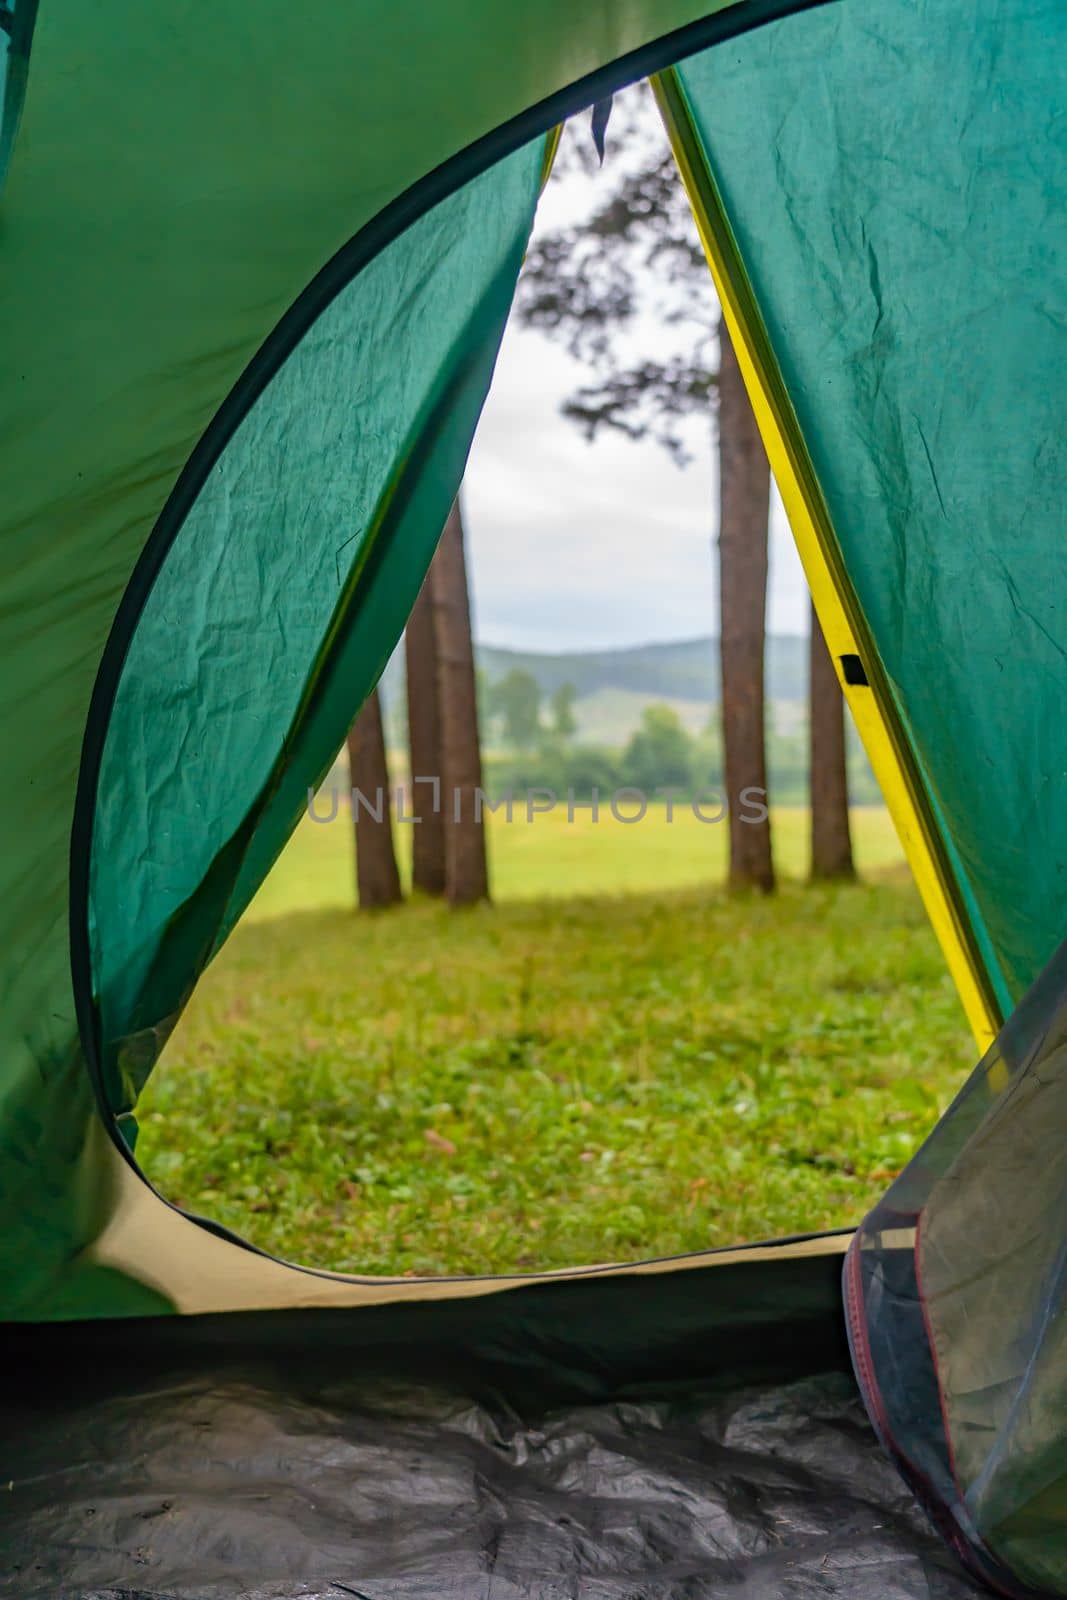 View from the tent to the forest. The concept of outdoor recreation